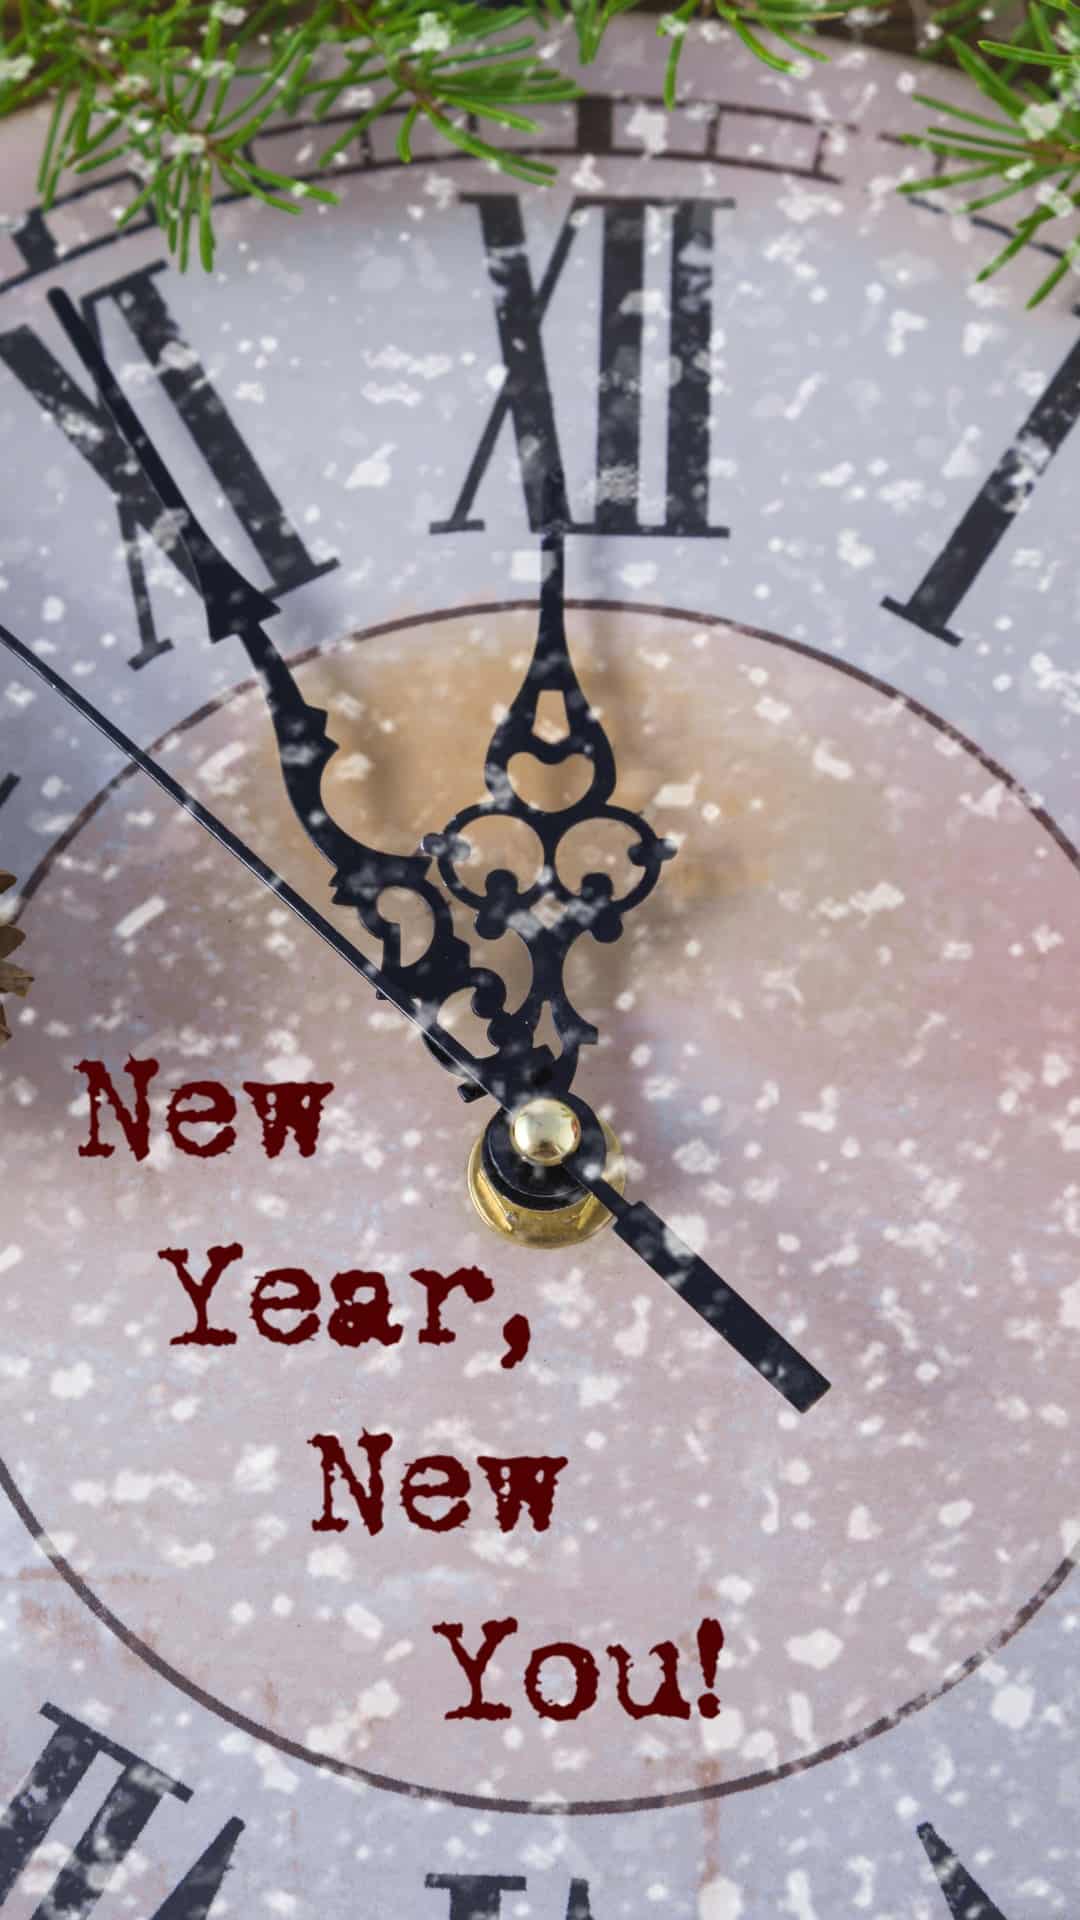 A clock with the words new year, you on it - Apple Watch, New Year